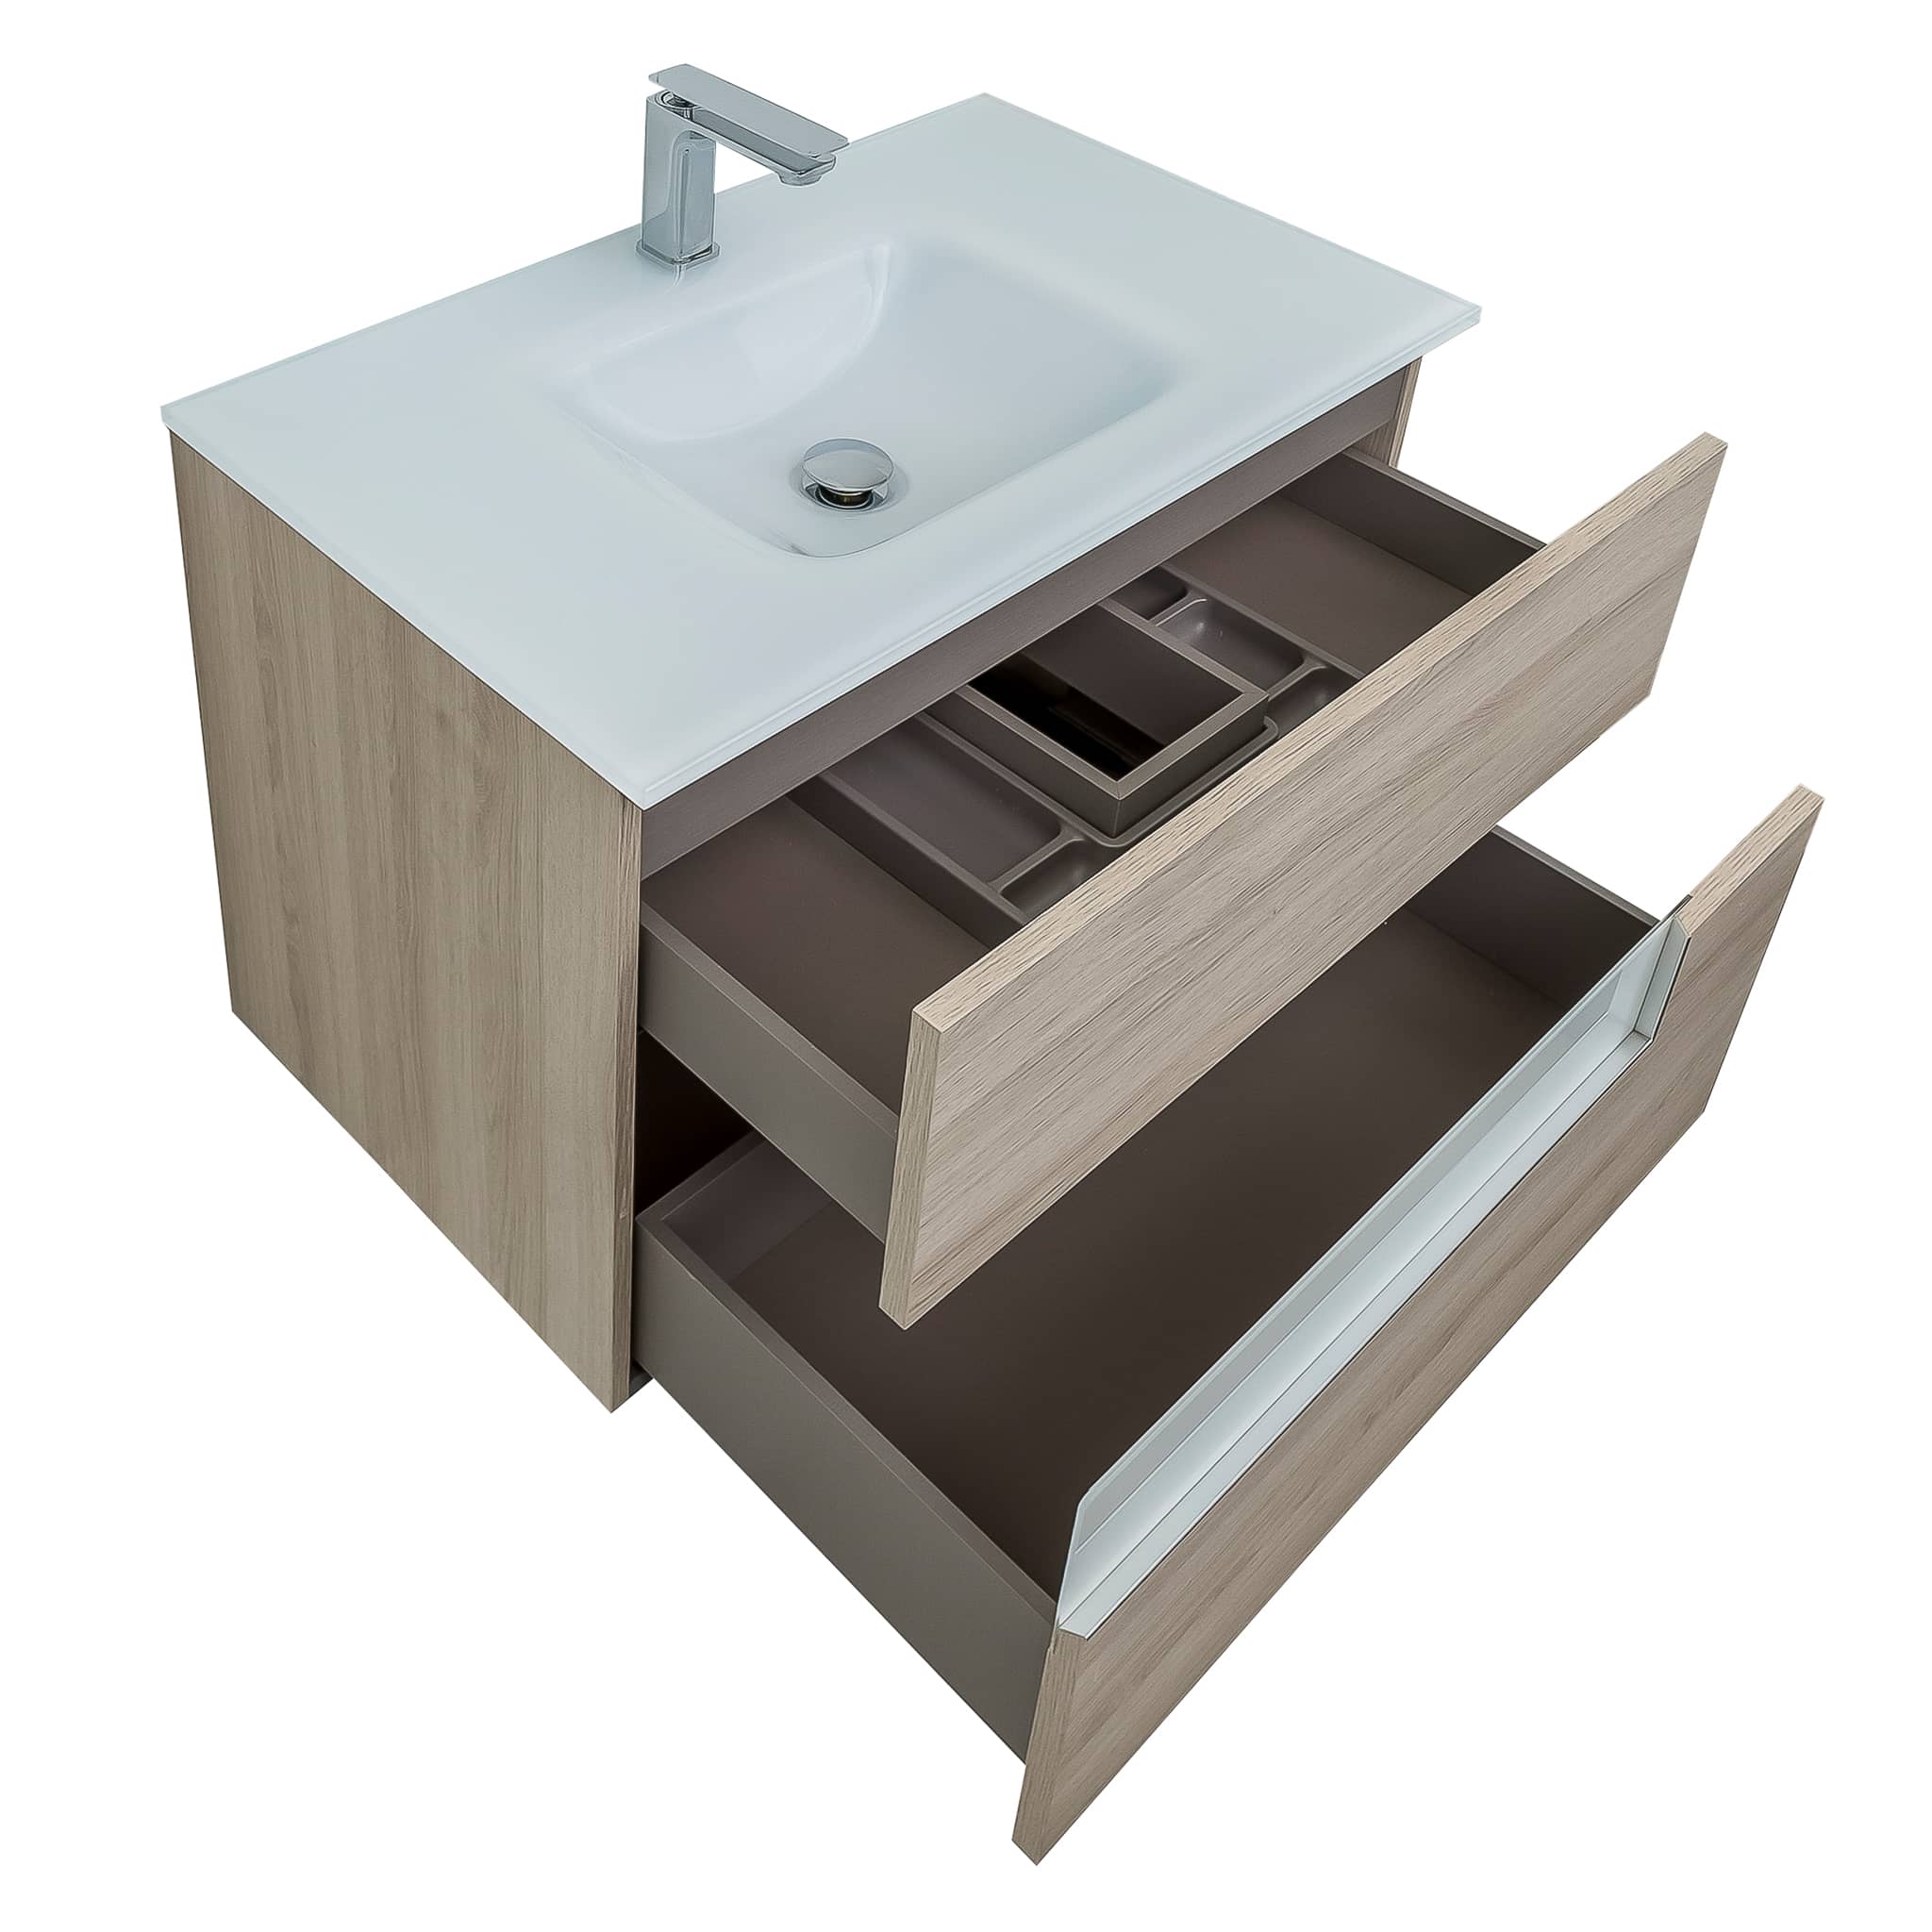 Vision 39.5 Natural Light  Wood Cabinet, White Tempered Glass Sink, Wall Mounted Modern Vanity Set